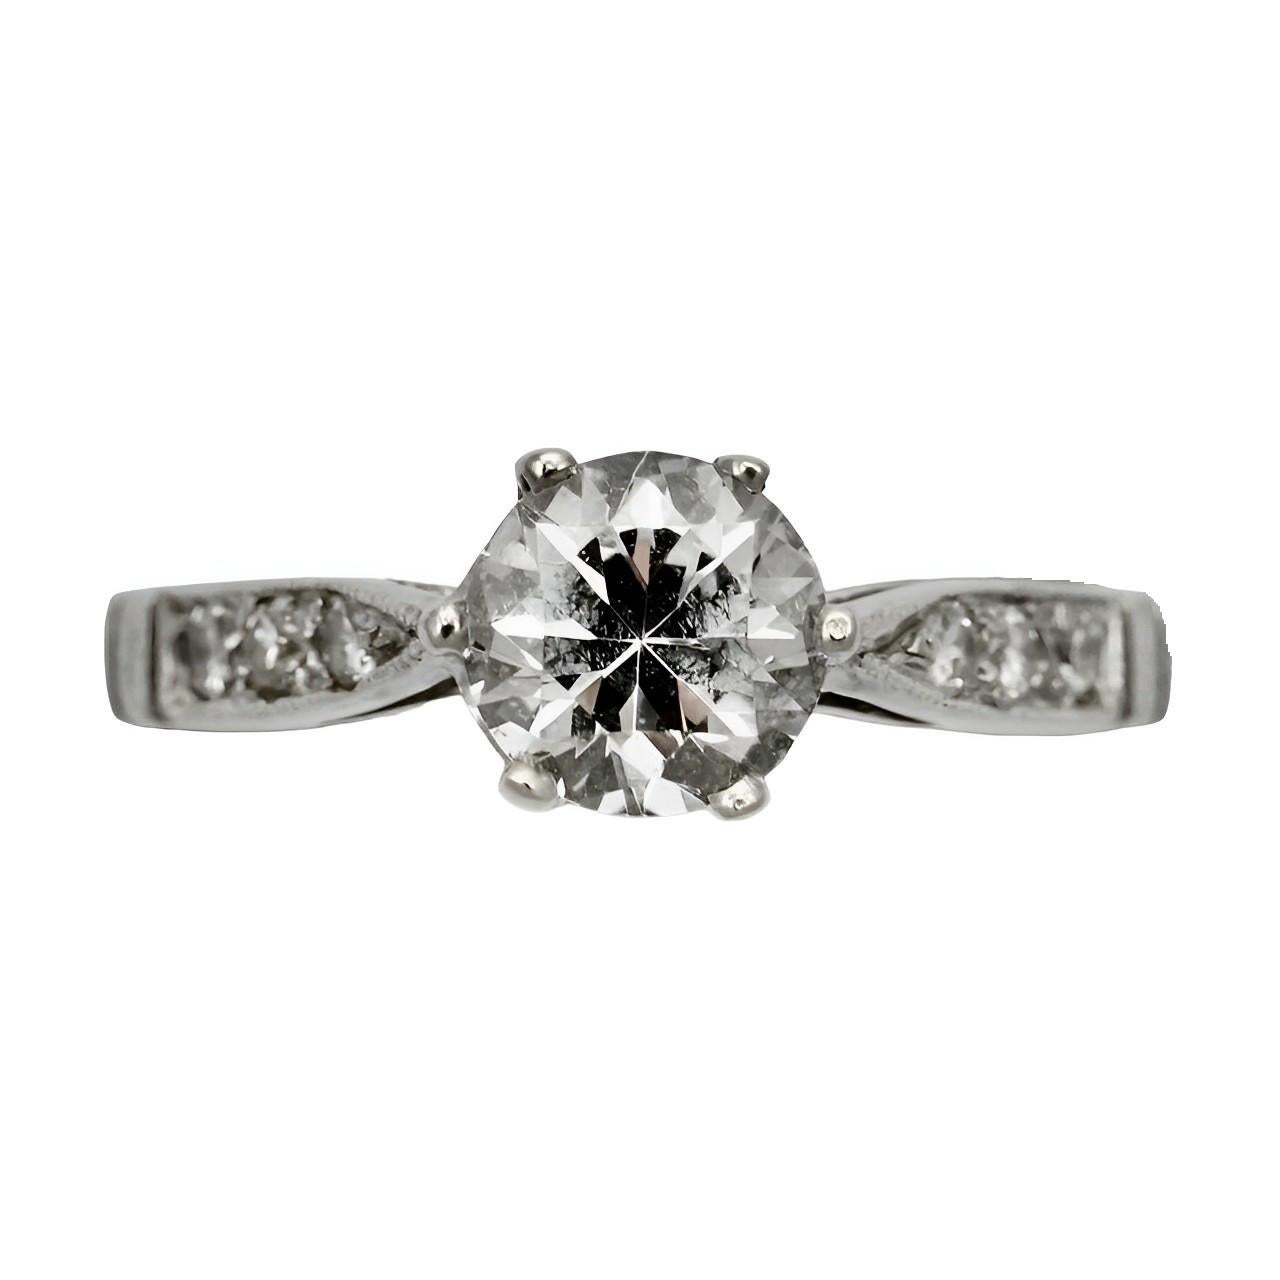 Beautiful 9K white gold ring, featuring a faceted solitaire crystal, with six diamonds decorating the shoulders. 

The ring is stamped with a crown, 375, a leopard's head, and the letter E. The makers mark is BL. This means that the ring is 9K gold,